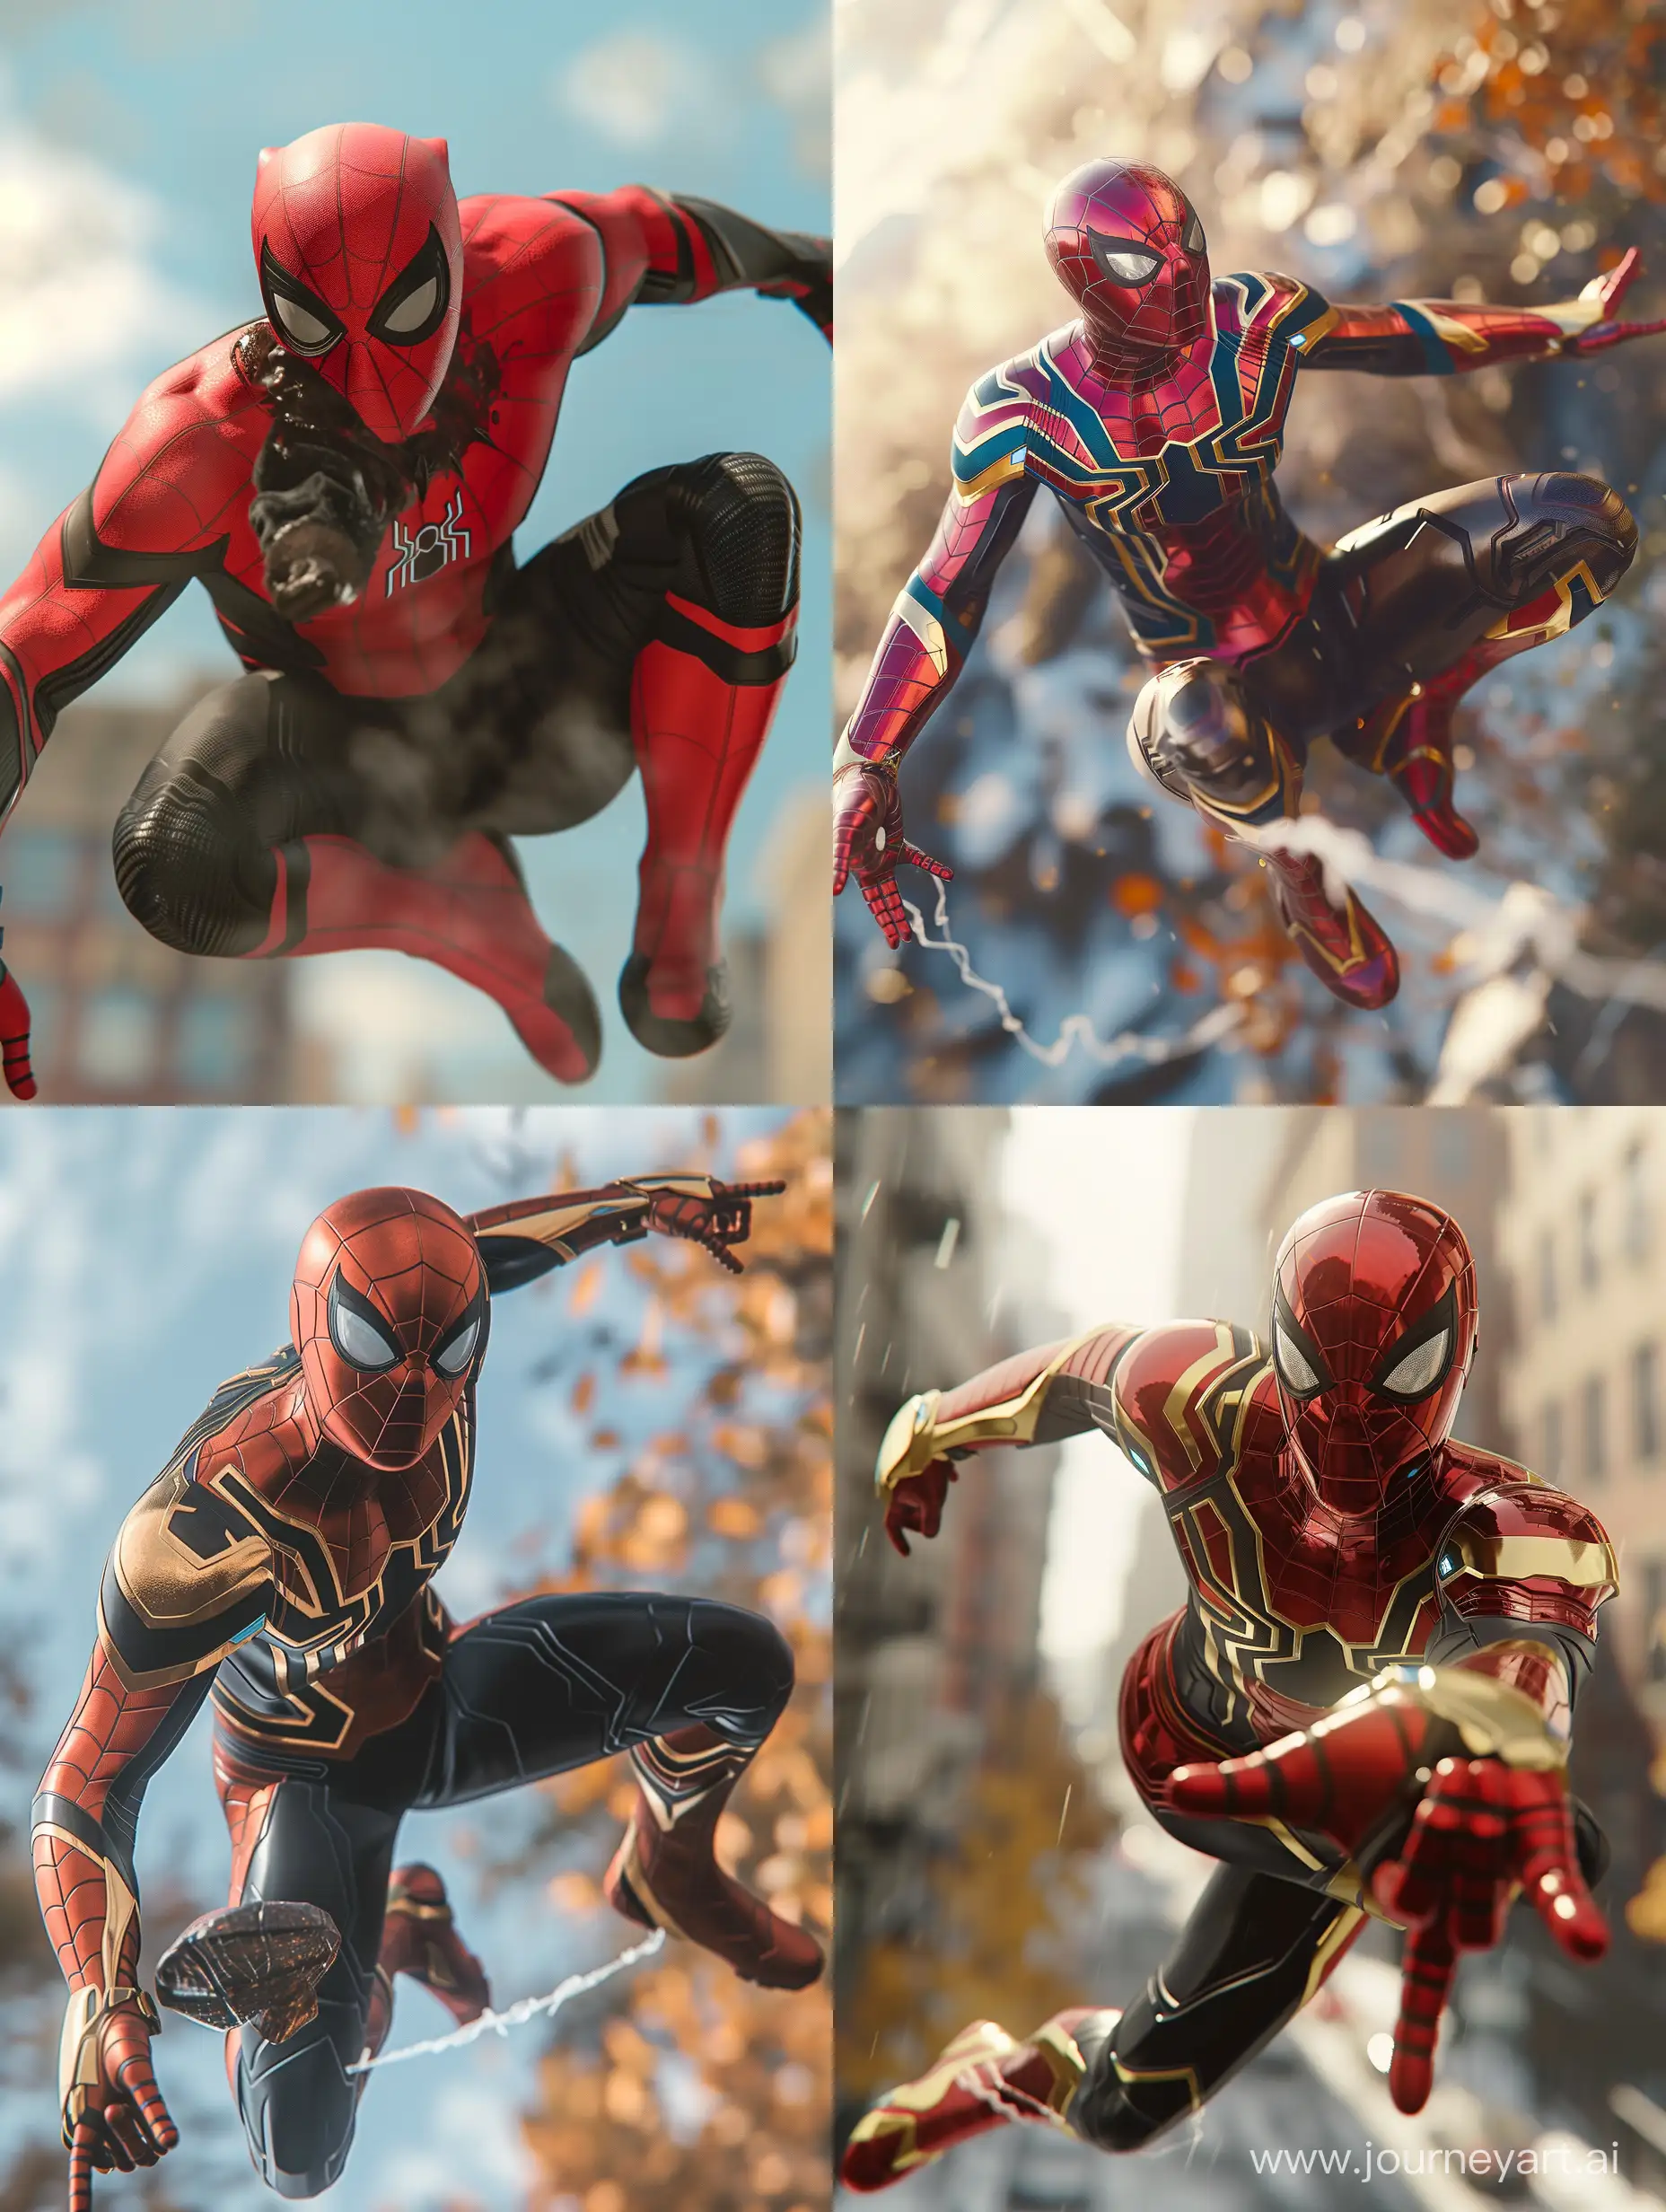 Epic-Fusion-SpiderMan-Black-Panther-and-Iron-Man-Suit-in-Unreal-Engine